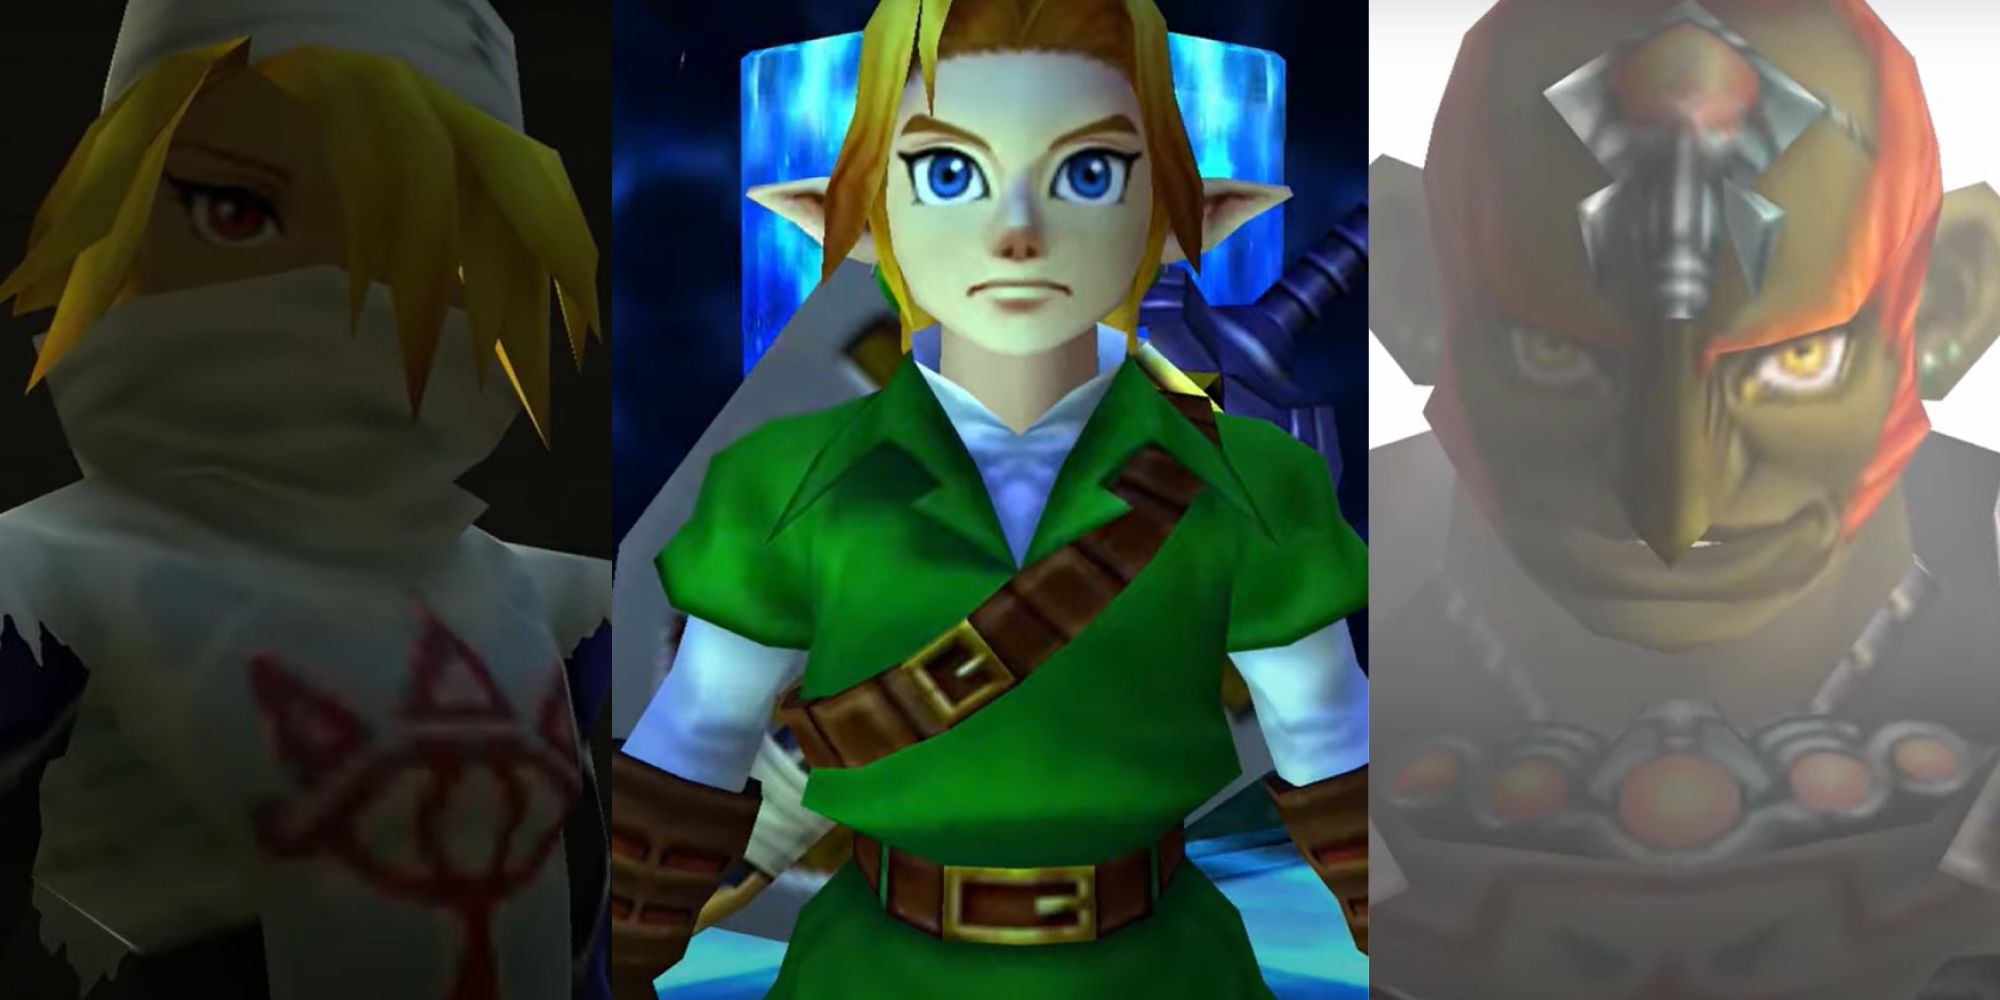 The 10 most memorable songs from Ocarina of Time